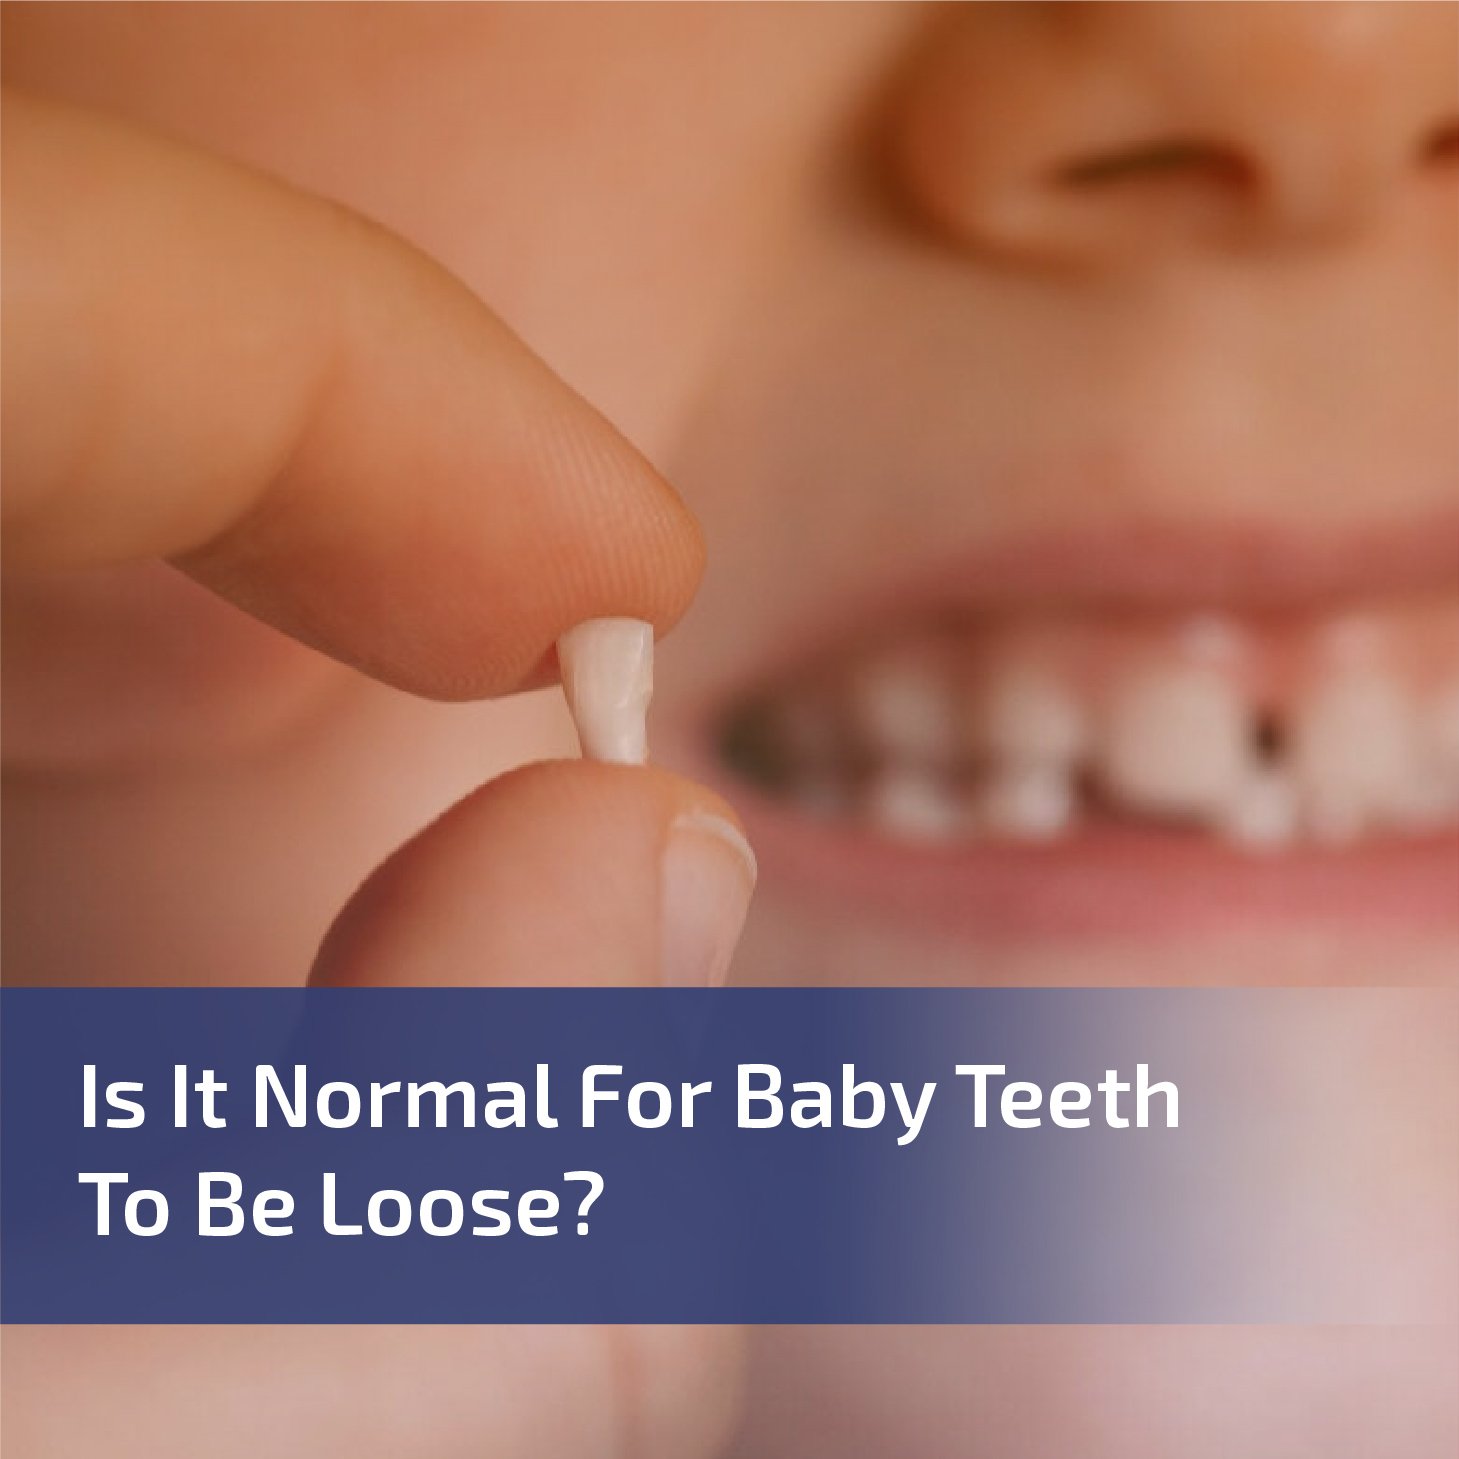 Is It Normal for Baby Teeth to Be Loose?